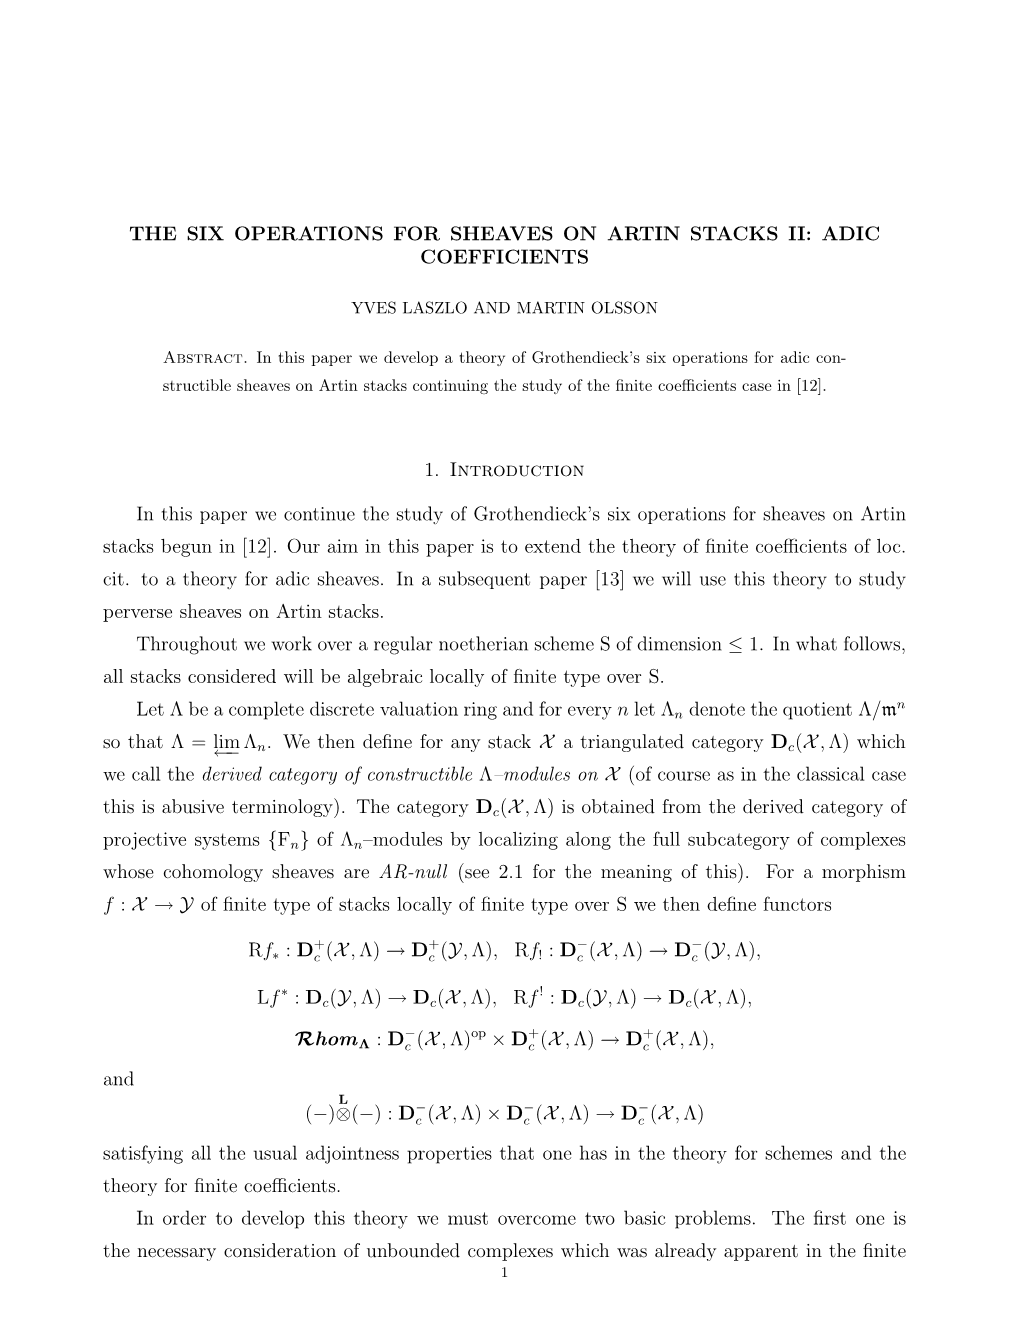 The Six Operations for Sheaves on Artin Stacks Ii: Adic Coefficients